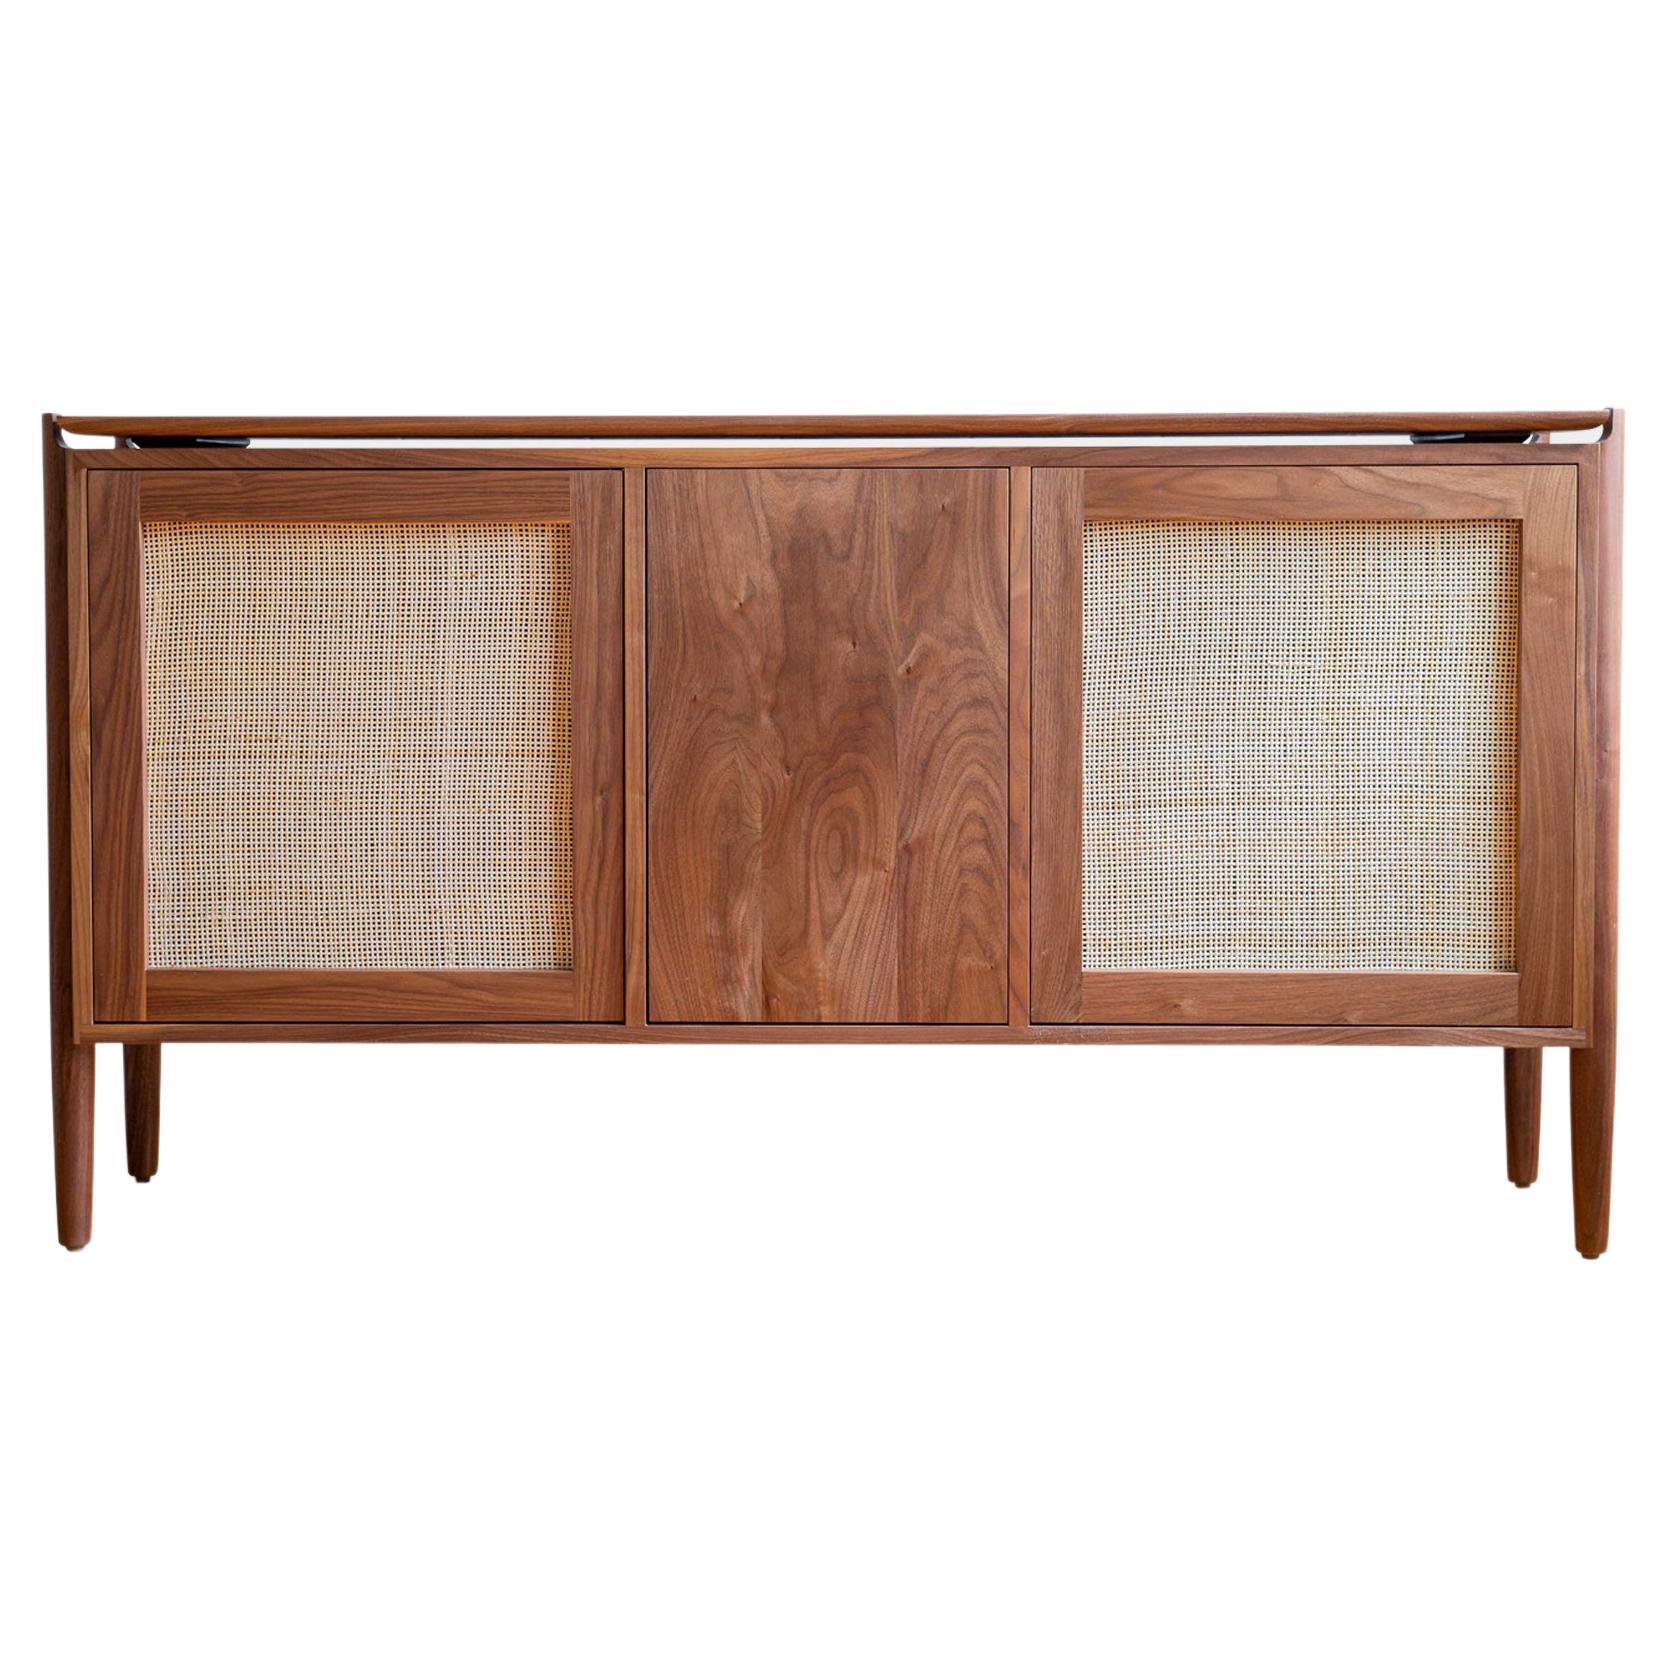 Low KABOT Sideboard in Walnut with 3 Cabinet Doors